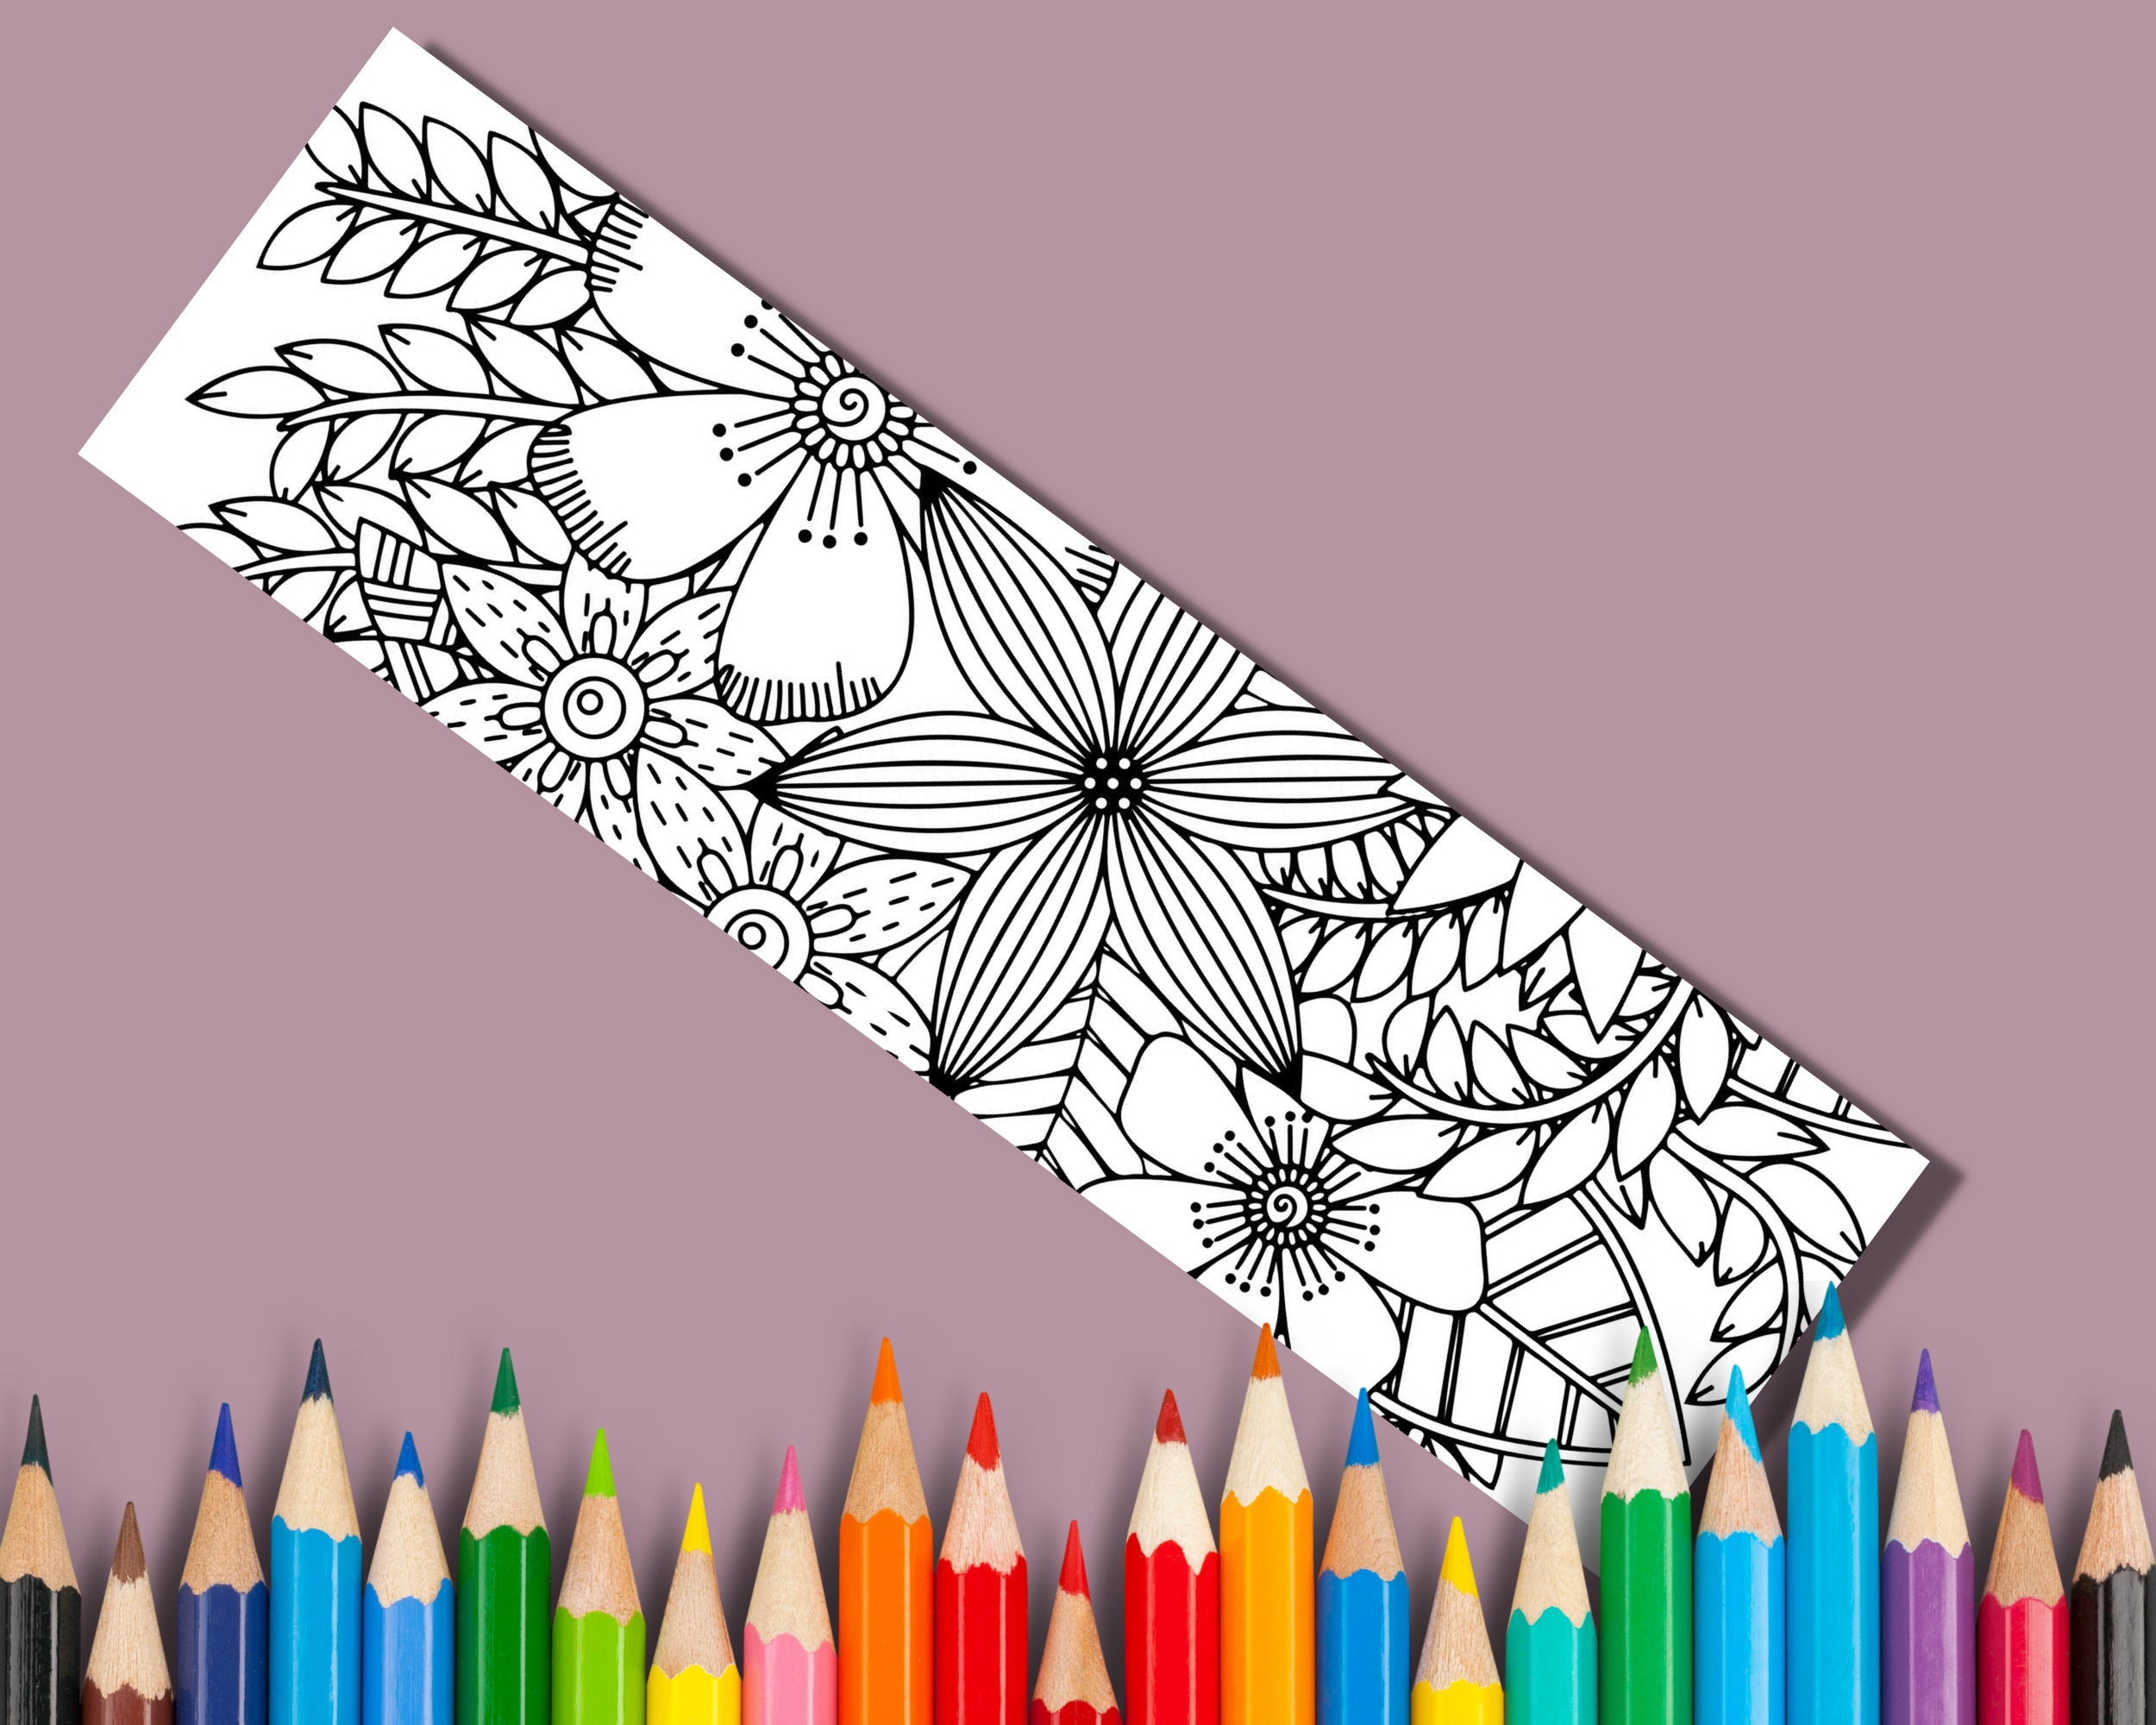 BEST VALUE Beautiful Patterns Coloring Bookmarks Set of 3 Bookmark PDF  Print and Cut, Floral, Mandala, Relaxing Activity for Book Lovers 